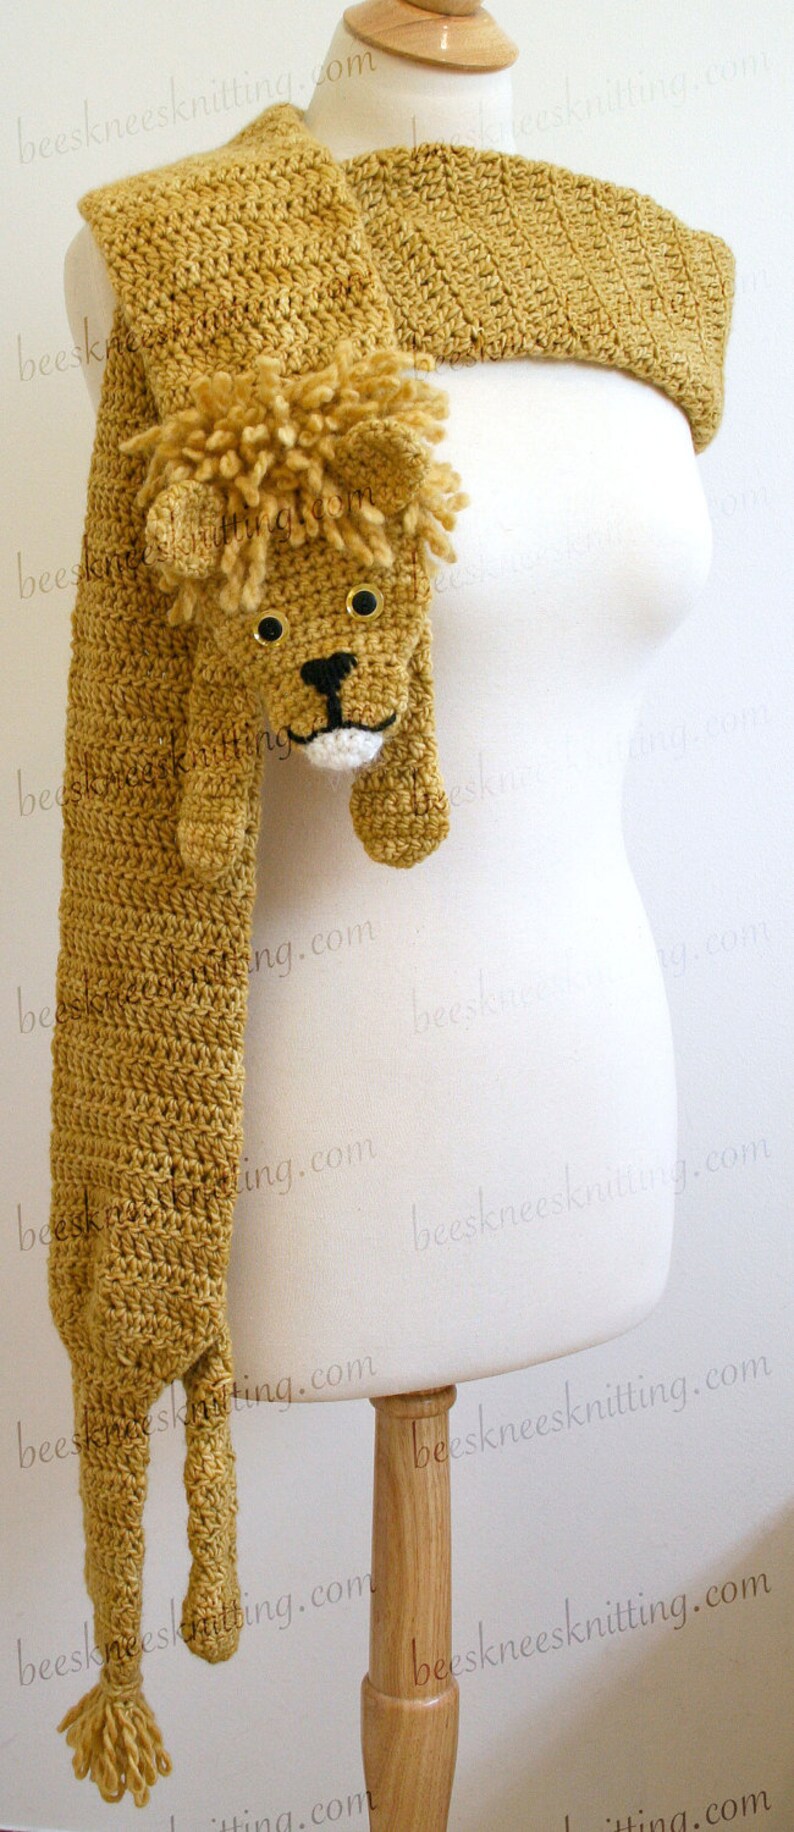 Digital PDF Crochet Pattern for Lion Scarf DIY Fashion Tutorial Instant Download ENGLISH only image 5